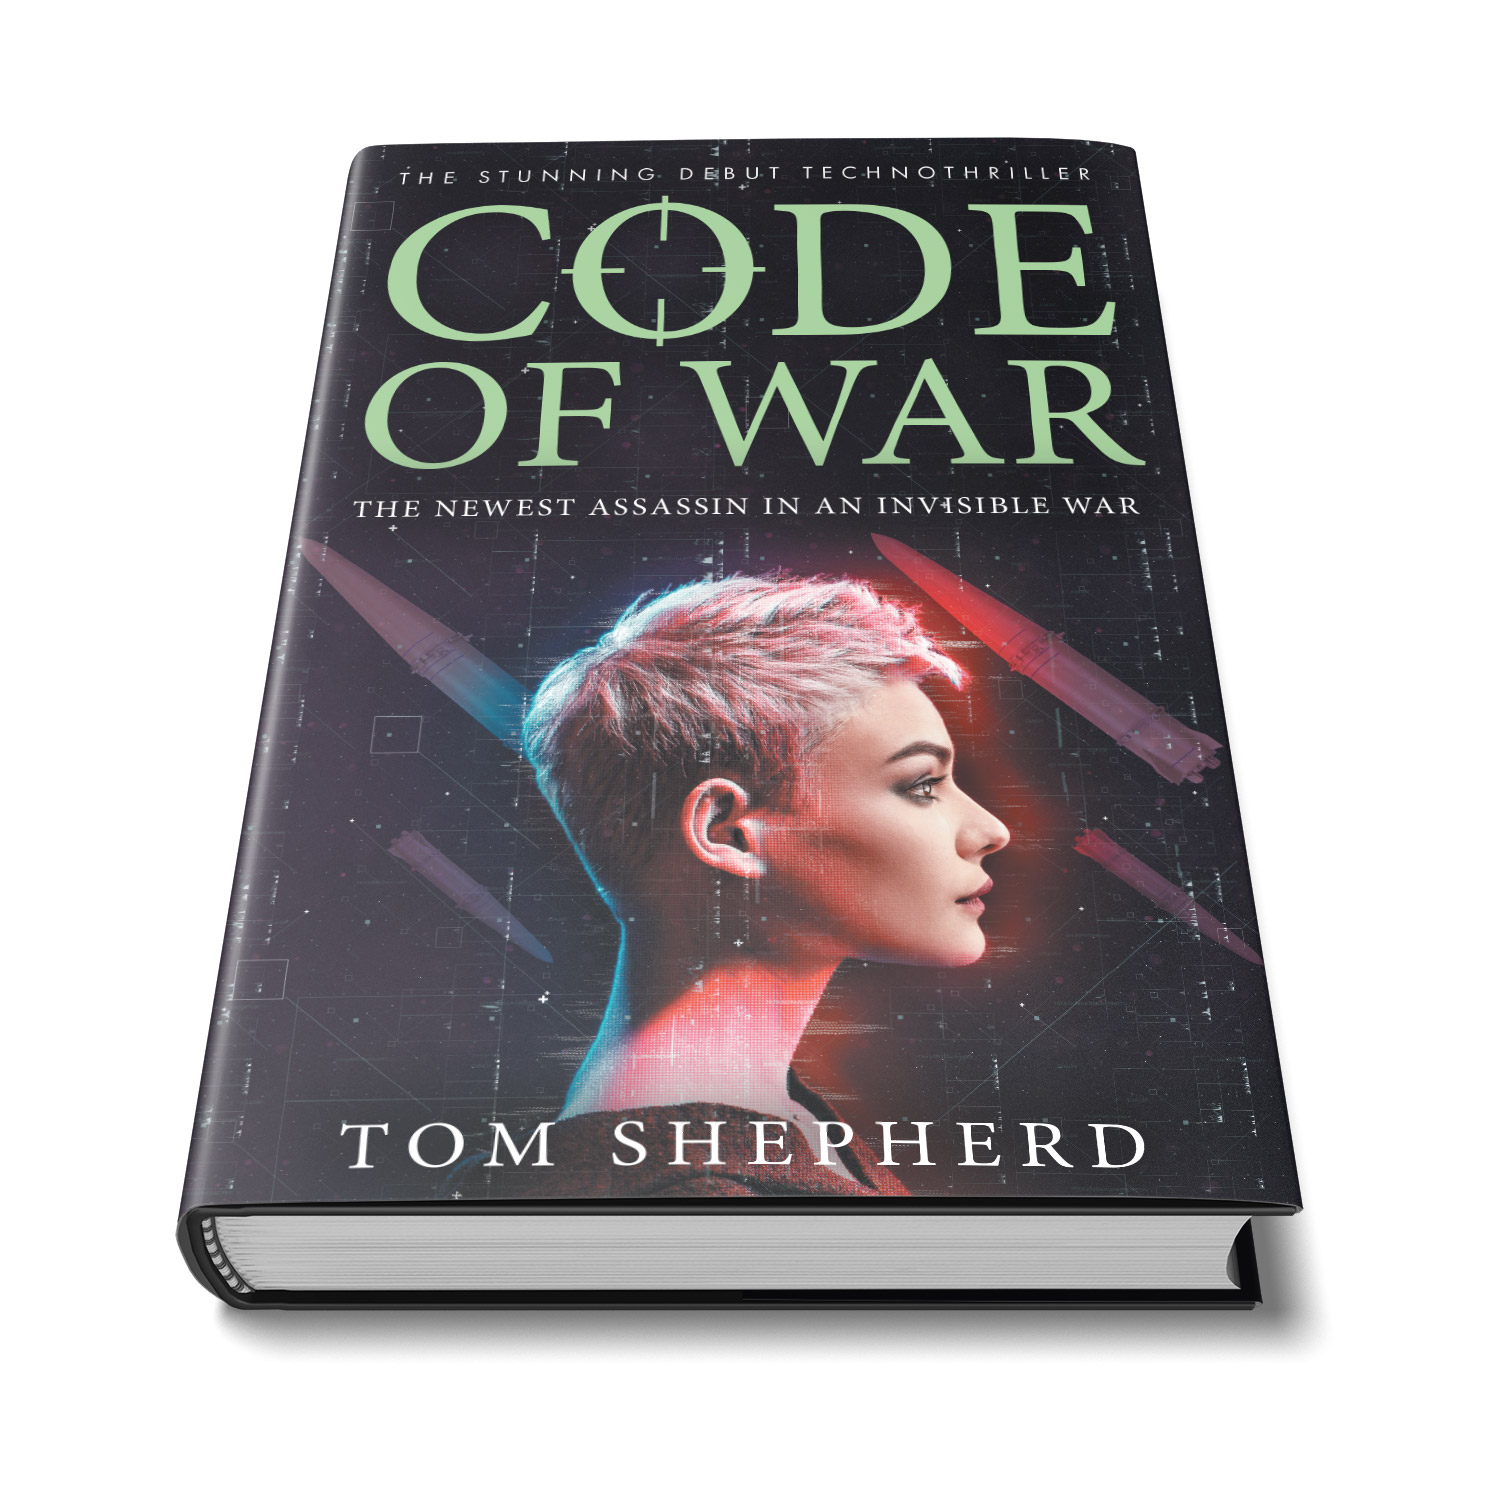 'Code of War' is a bleeding-edge, female-led, military technothriller. The author is Tom Shepherd. The book cover design and interior formatting are by Mark Thomas. To learn more about what Mark could do for your book, please visit coverness.com.